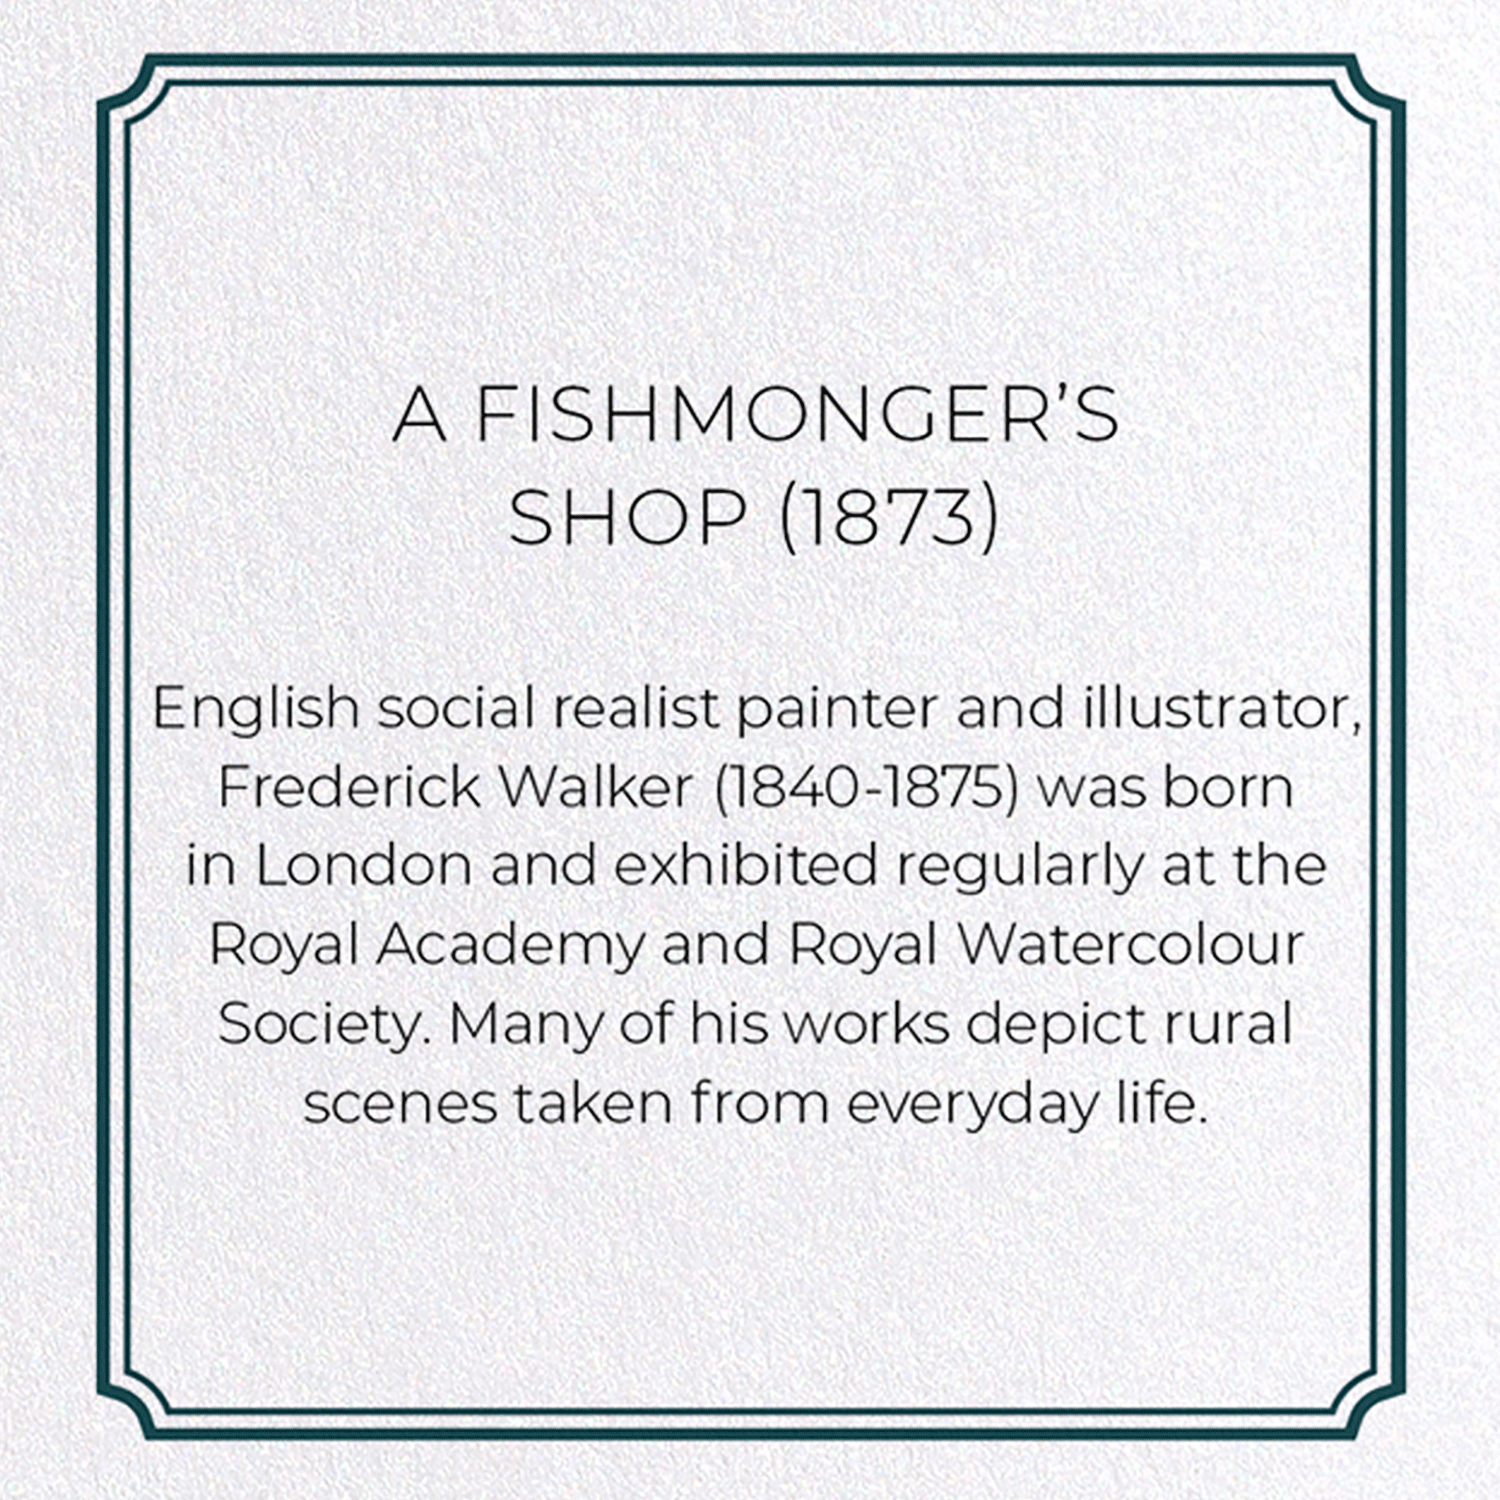 A FISHMONGER'S SHOP (1873): Painting Greeting Card